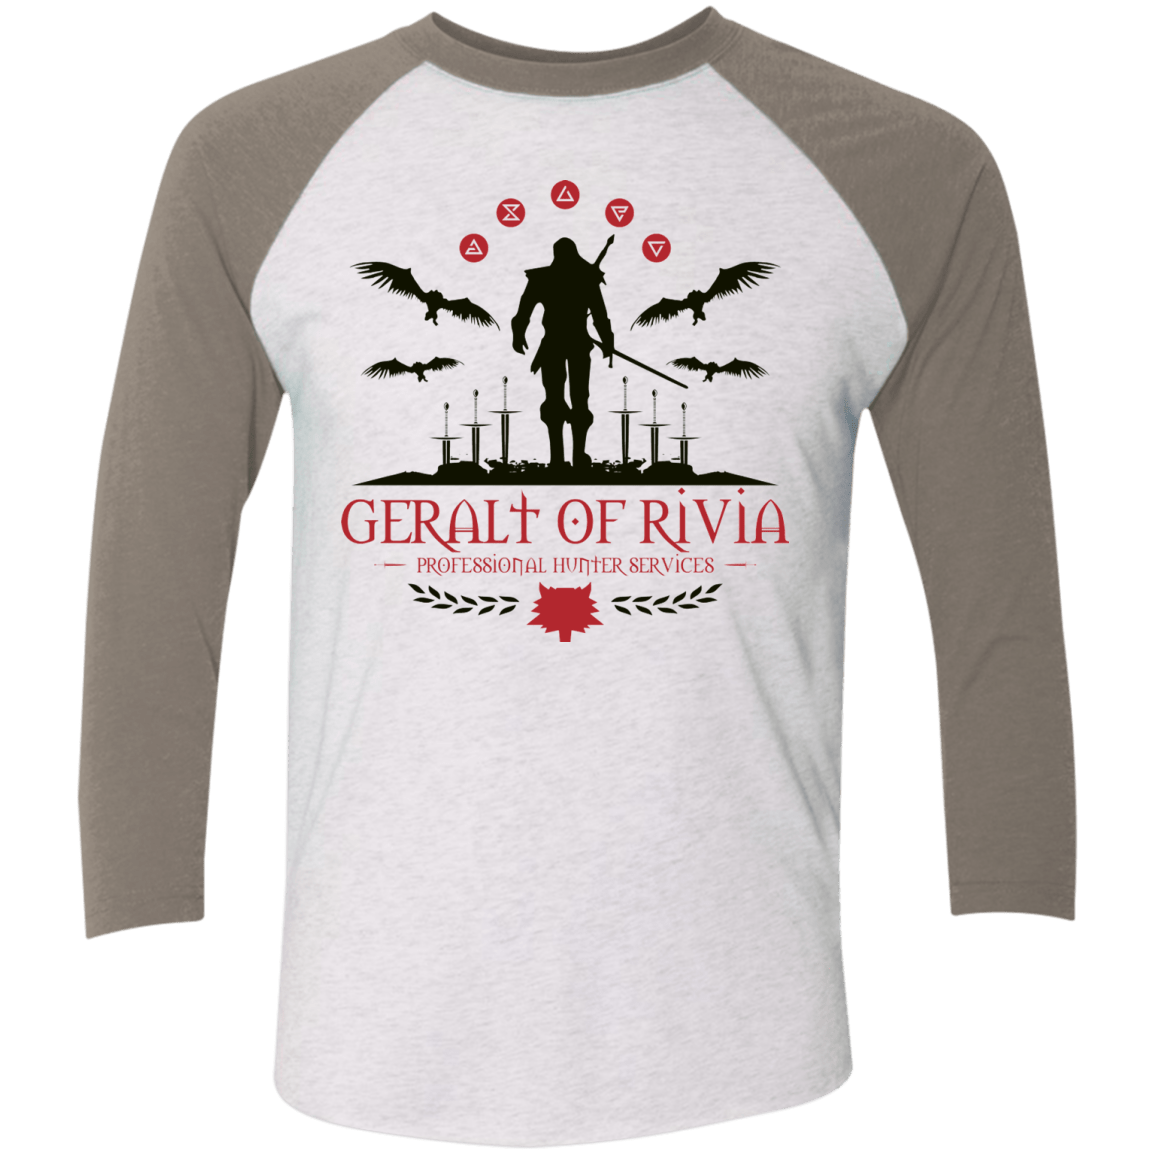 T-Shirts Heather White/Vintage Grey / X-Small The Witcher 3 Wild Hunt Men's Triblend 3/4 Sleeve